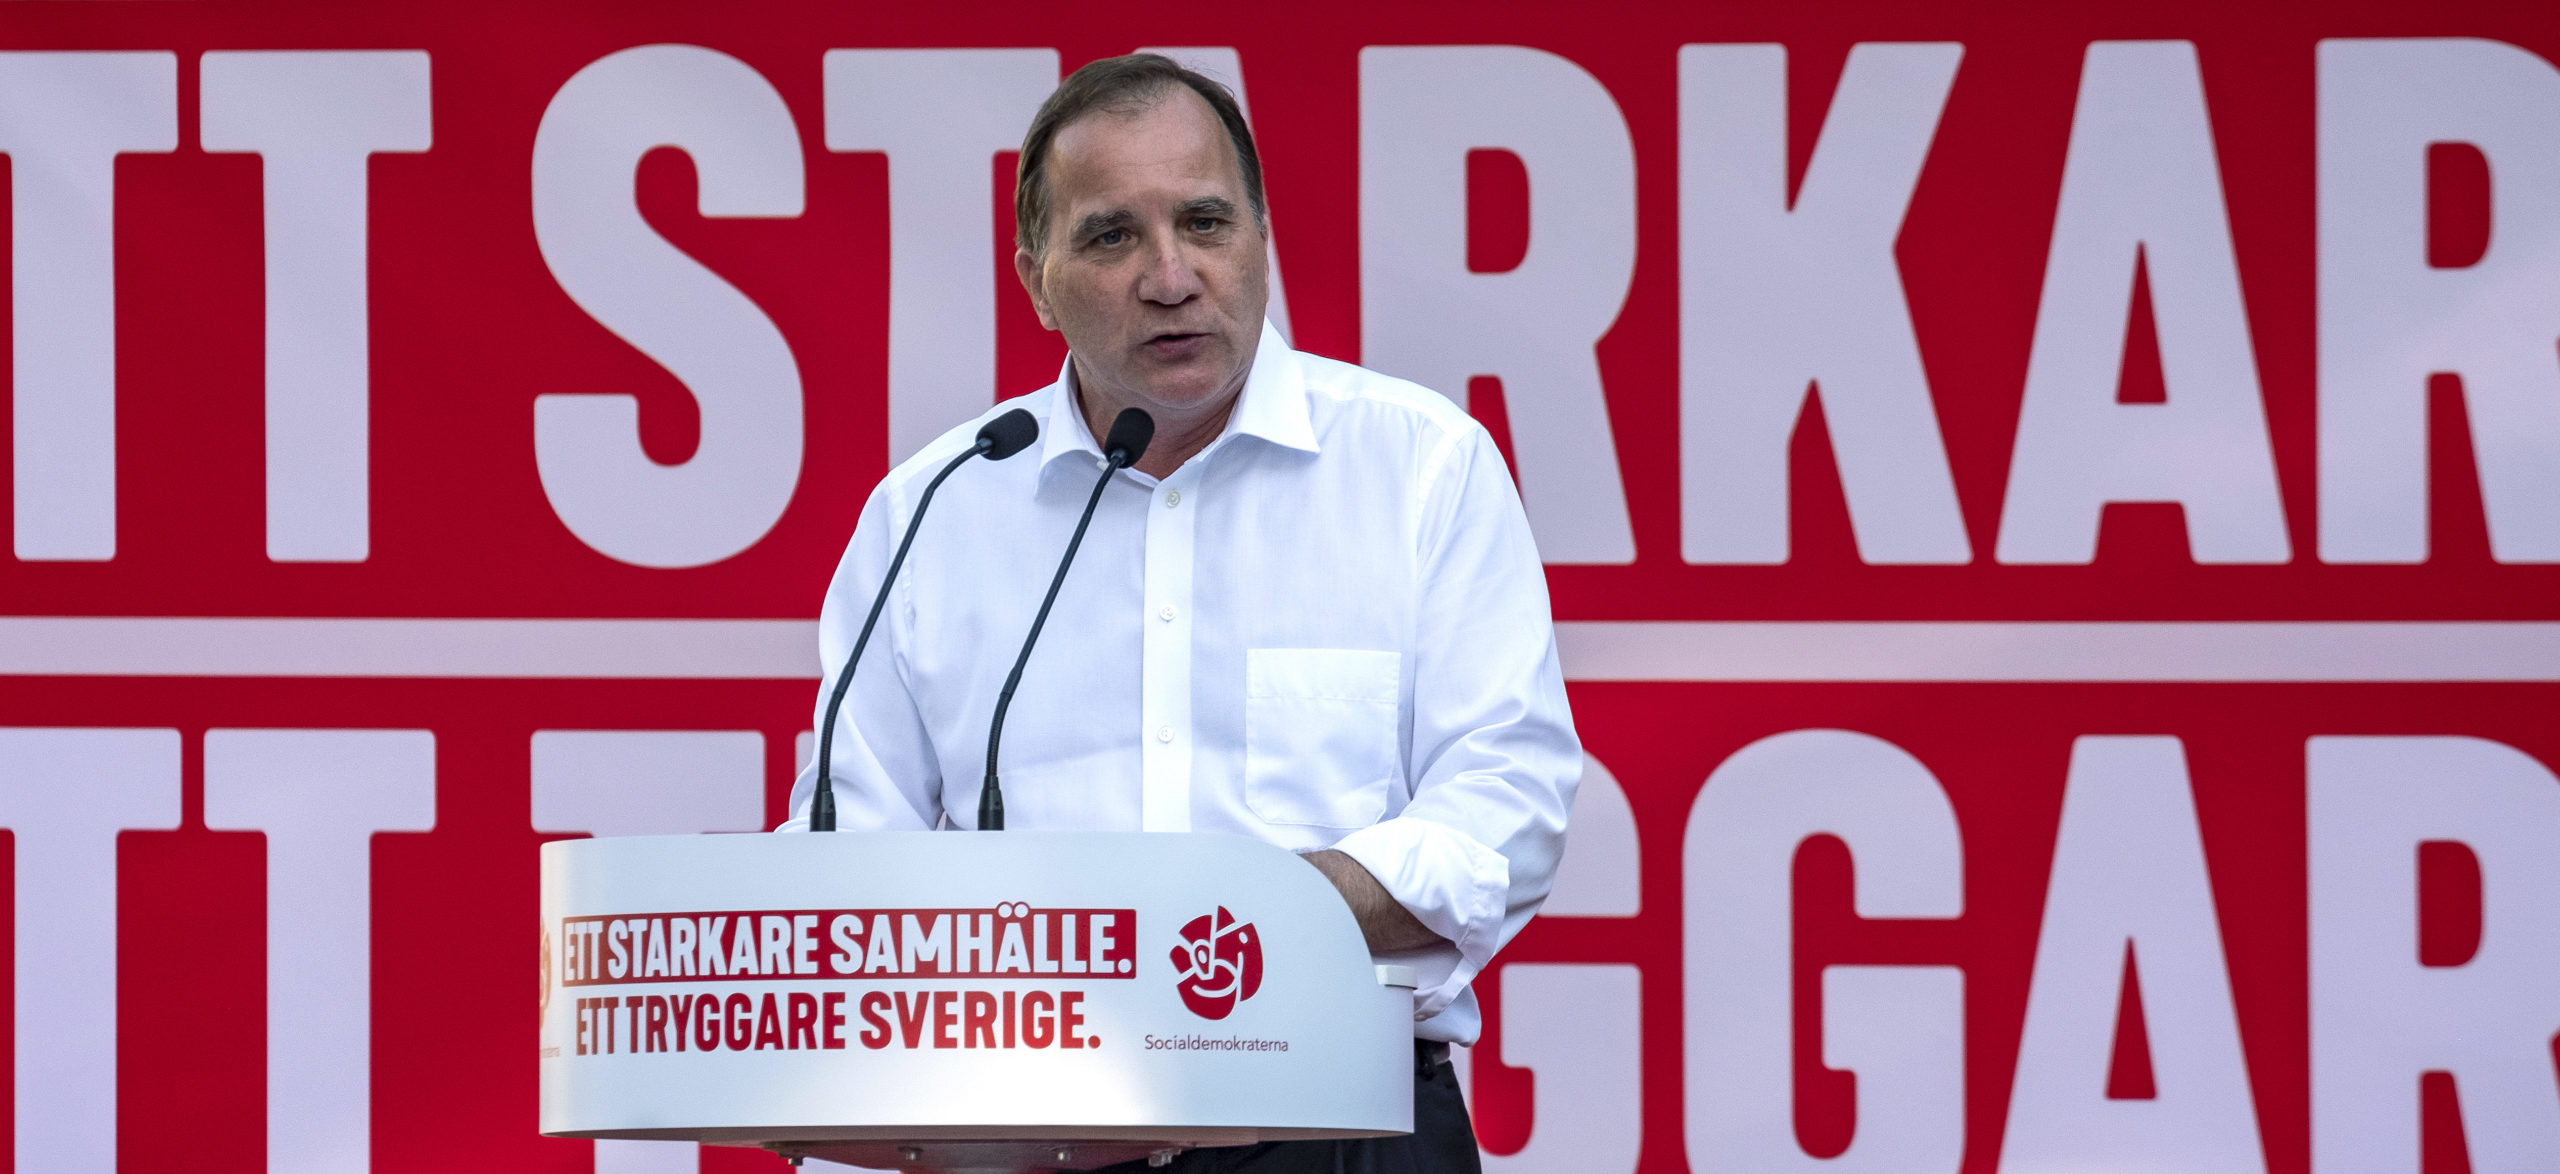 Takeaways from Sweden’s Election: Stability is History